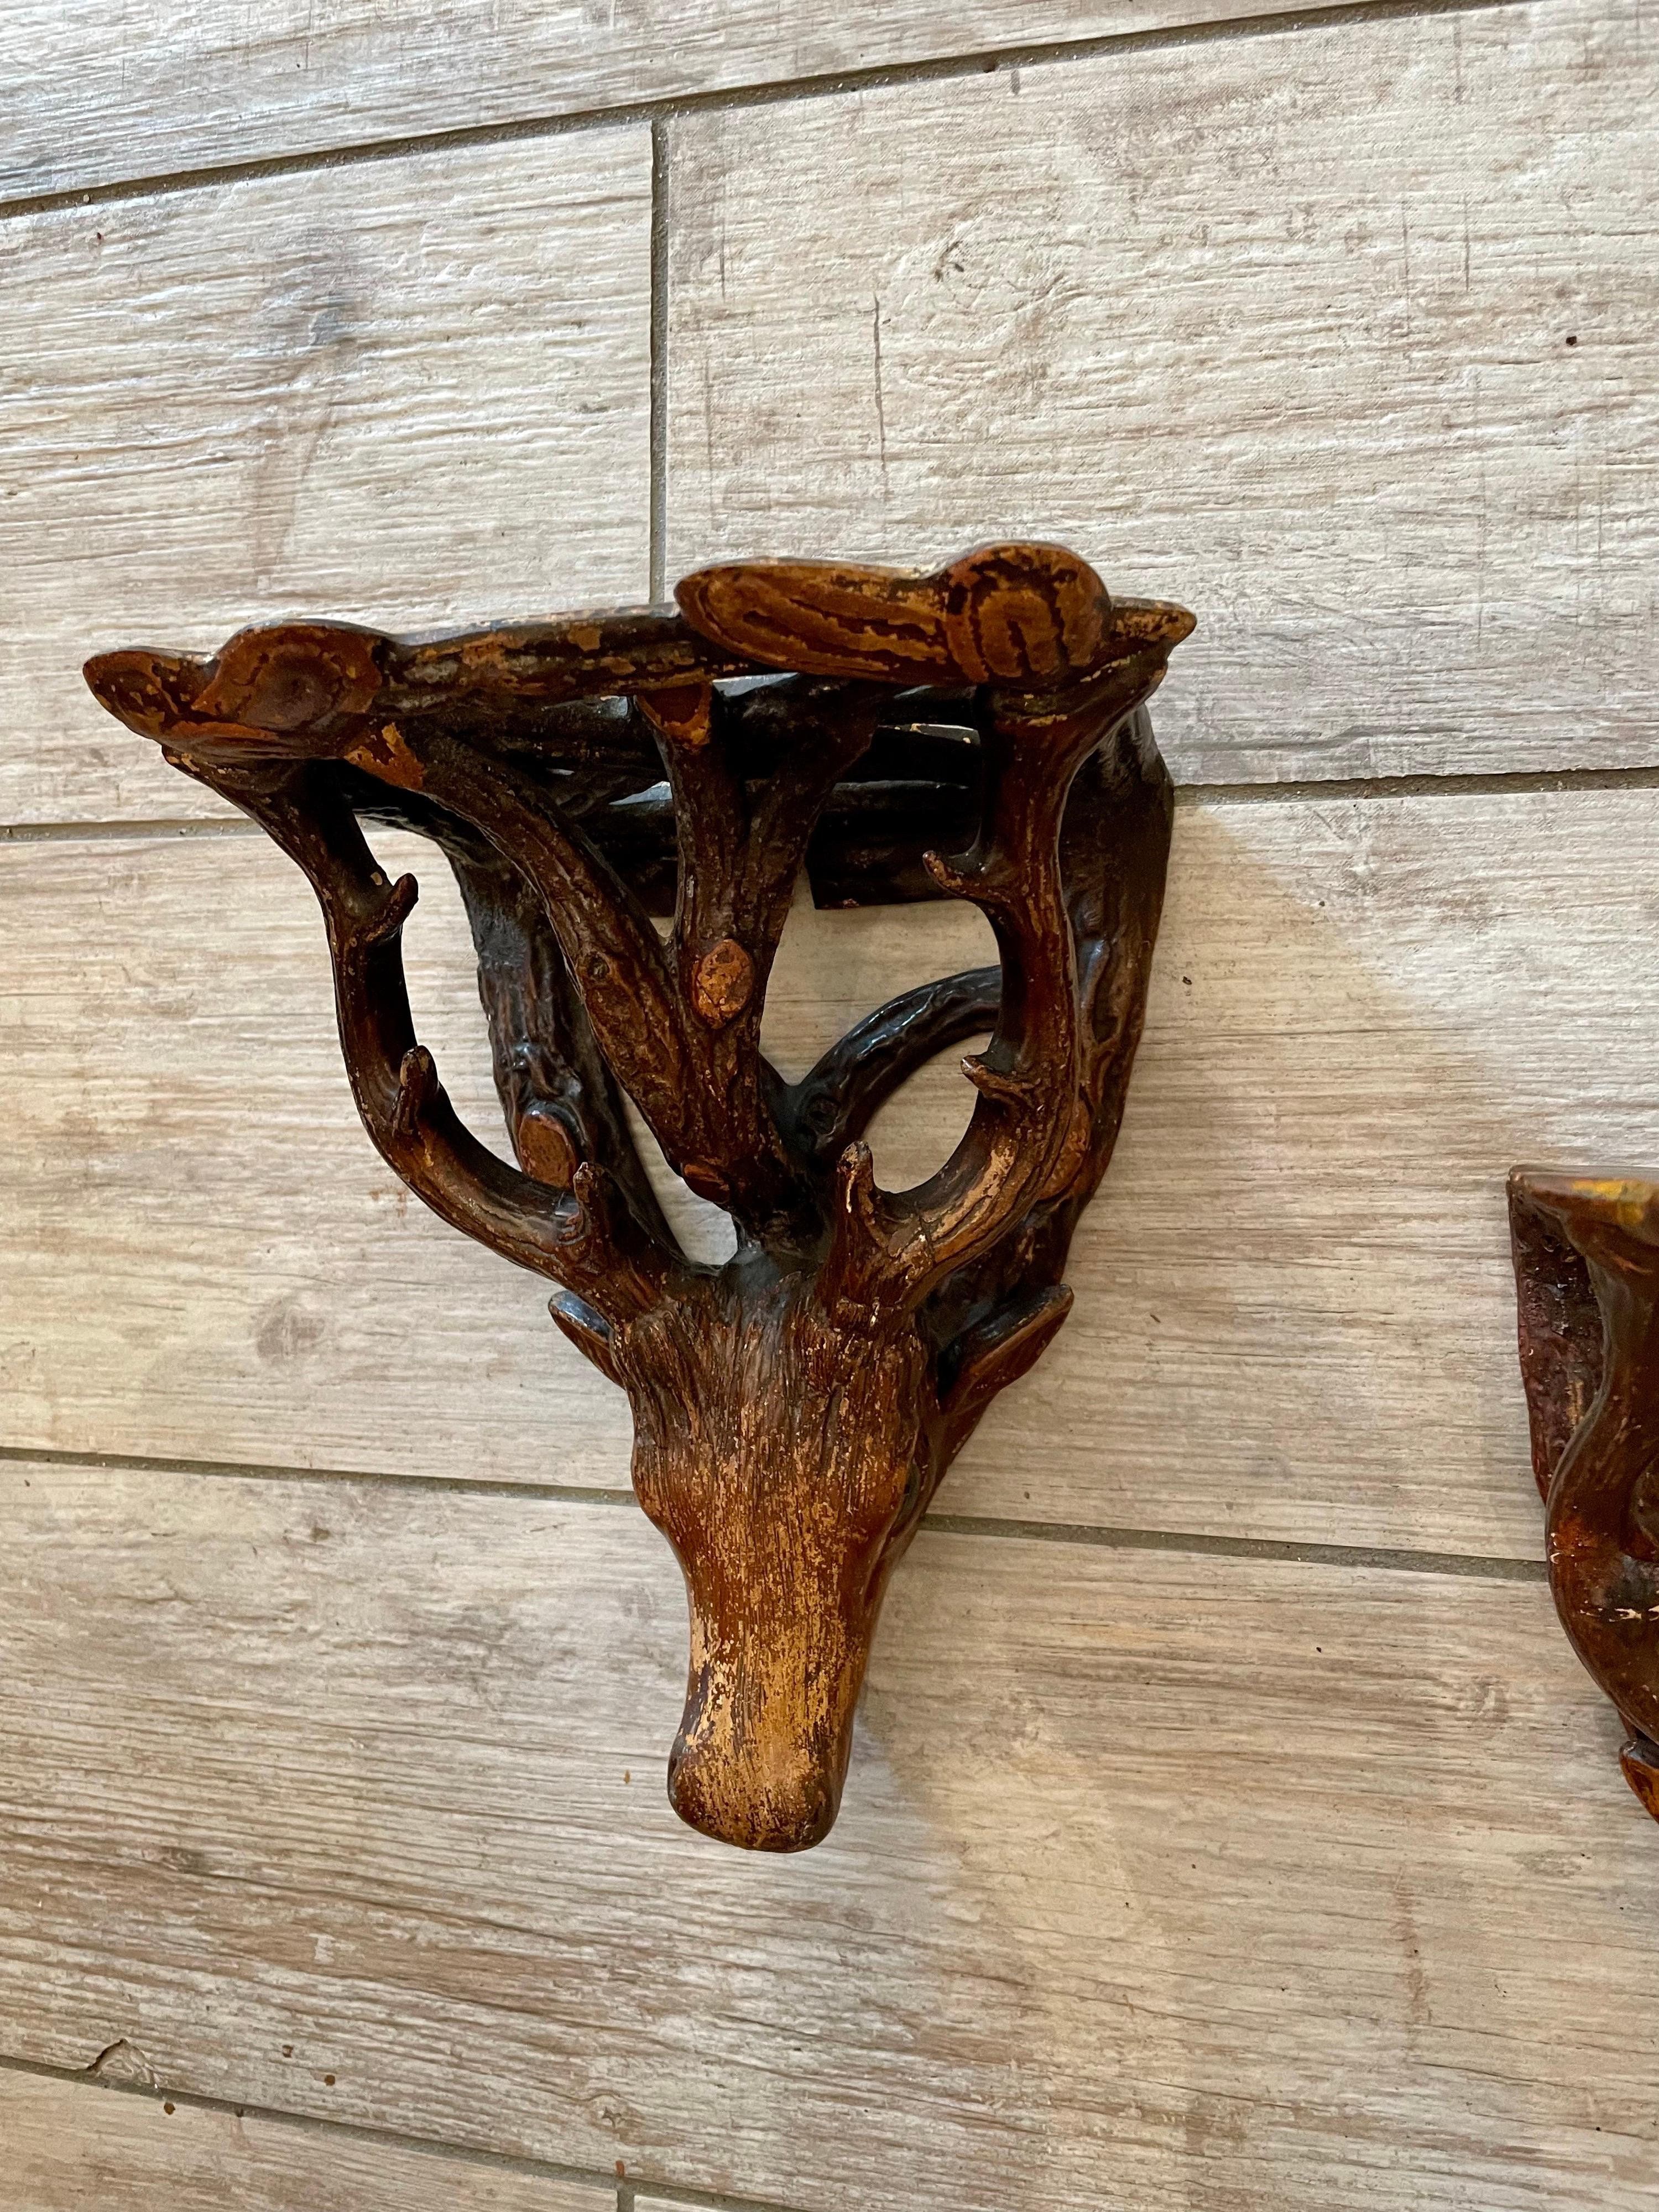 Pair of Black Forest style Deer head wall shelves or brackets. Made in a Faux Bois design.